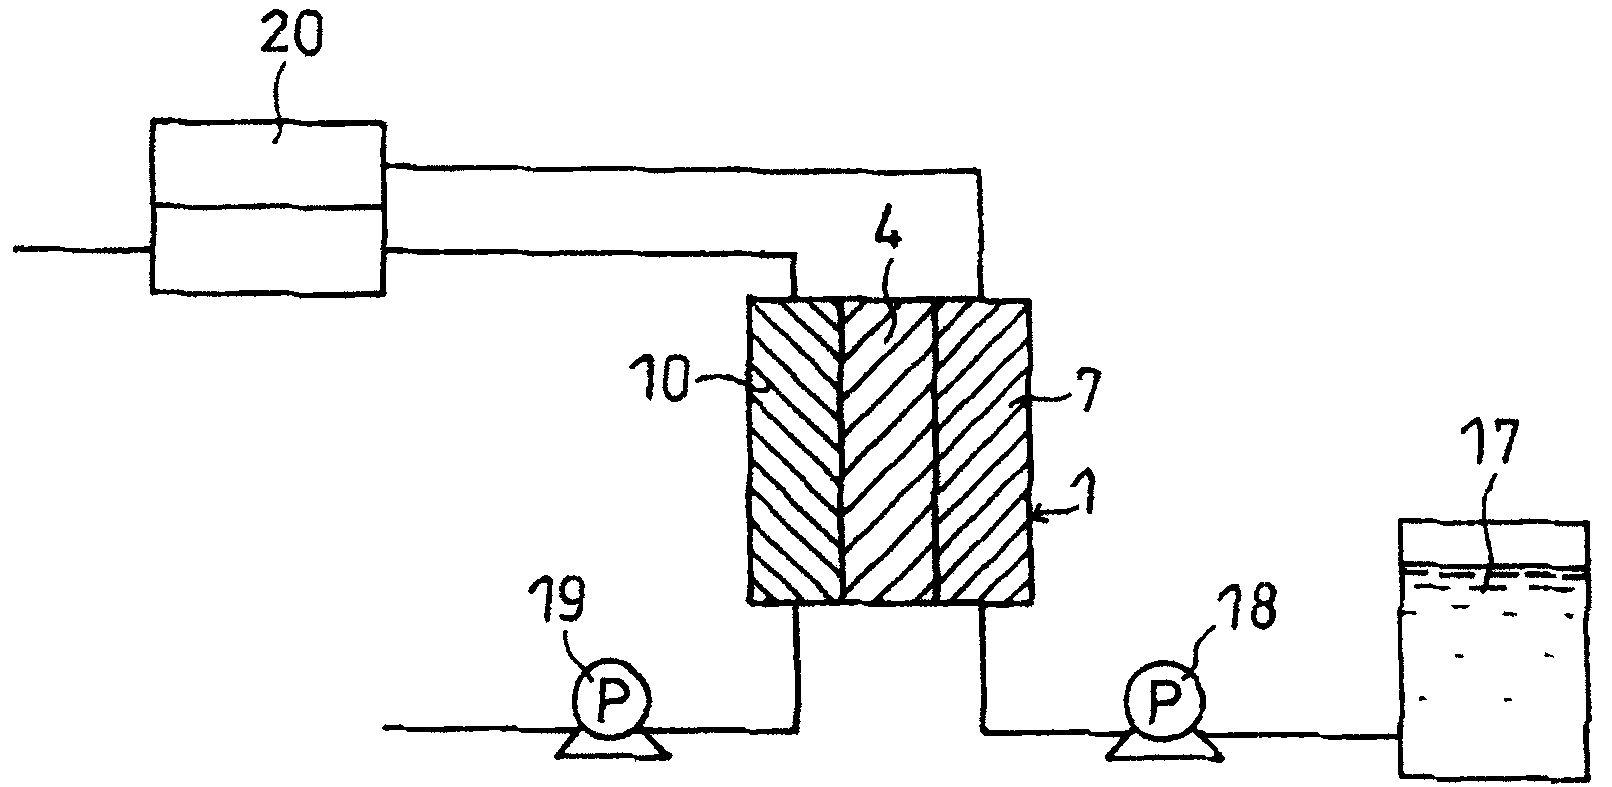 Direct-type fuel cell and direct-type fuel cell system